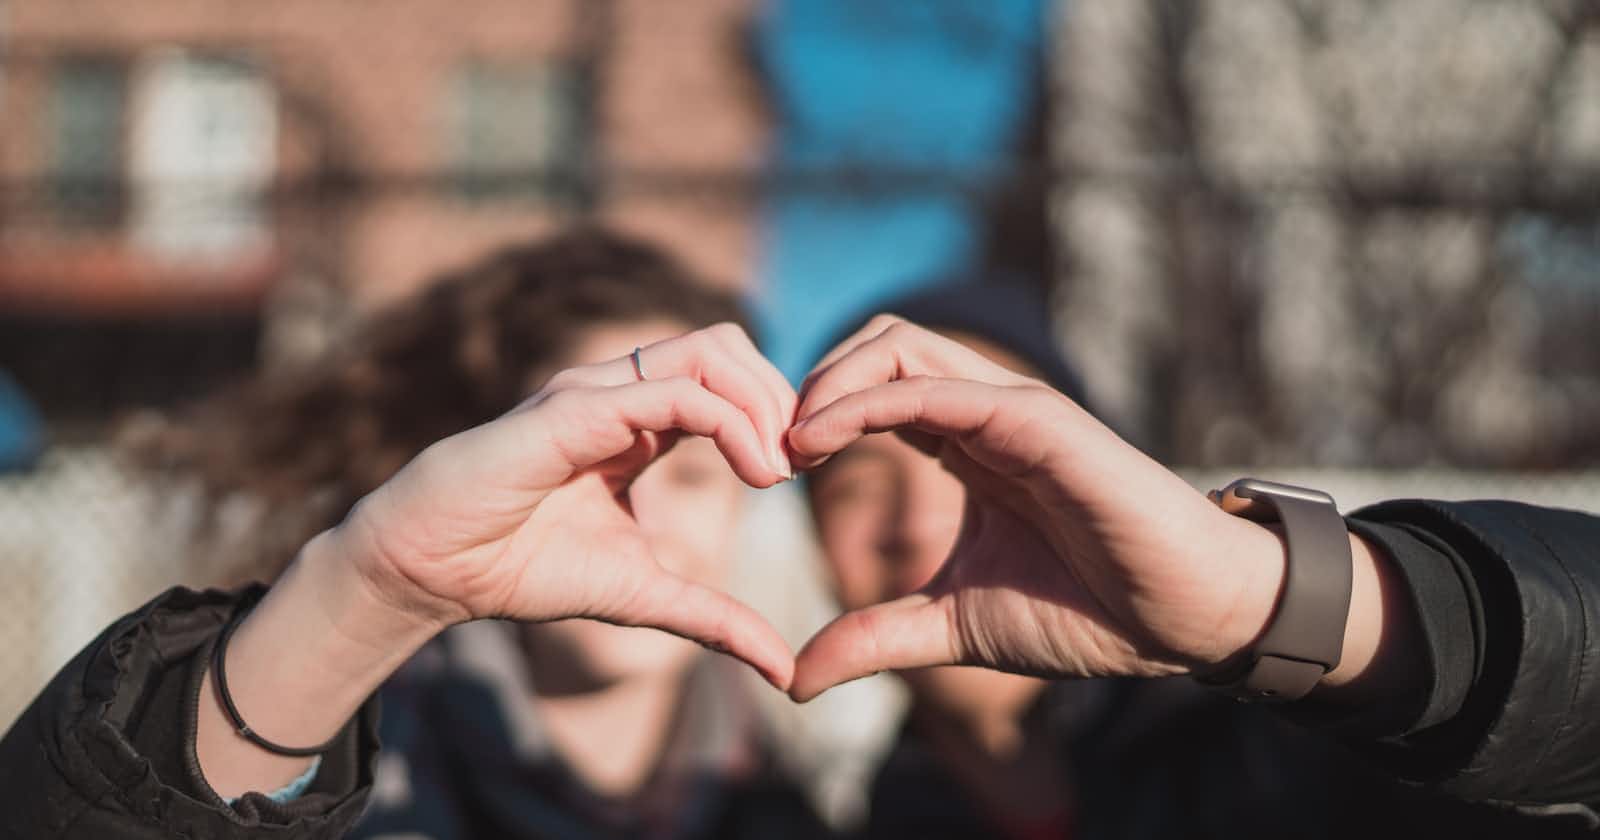 The Power of Connection: Building Meaningful Relationships and Community